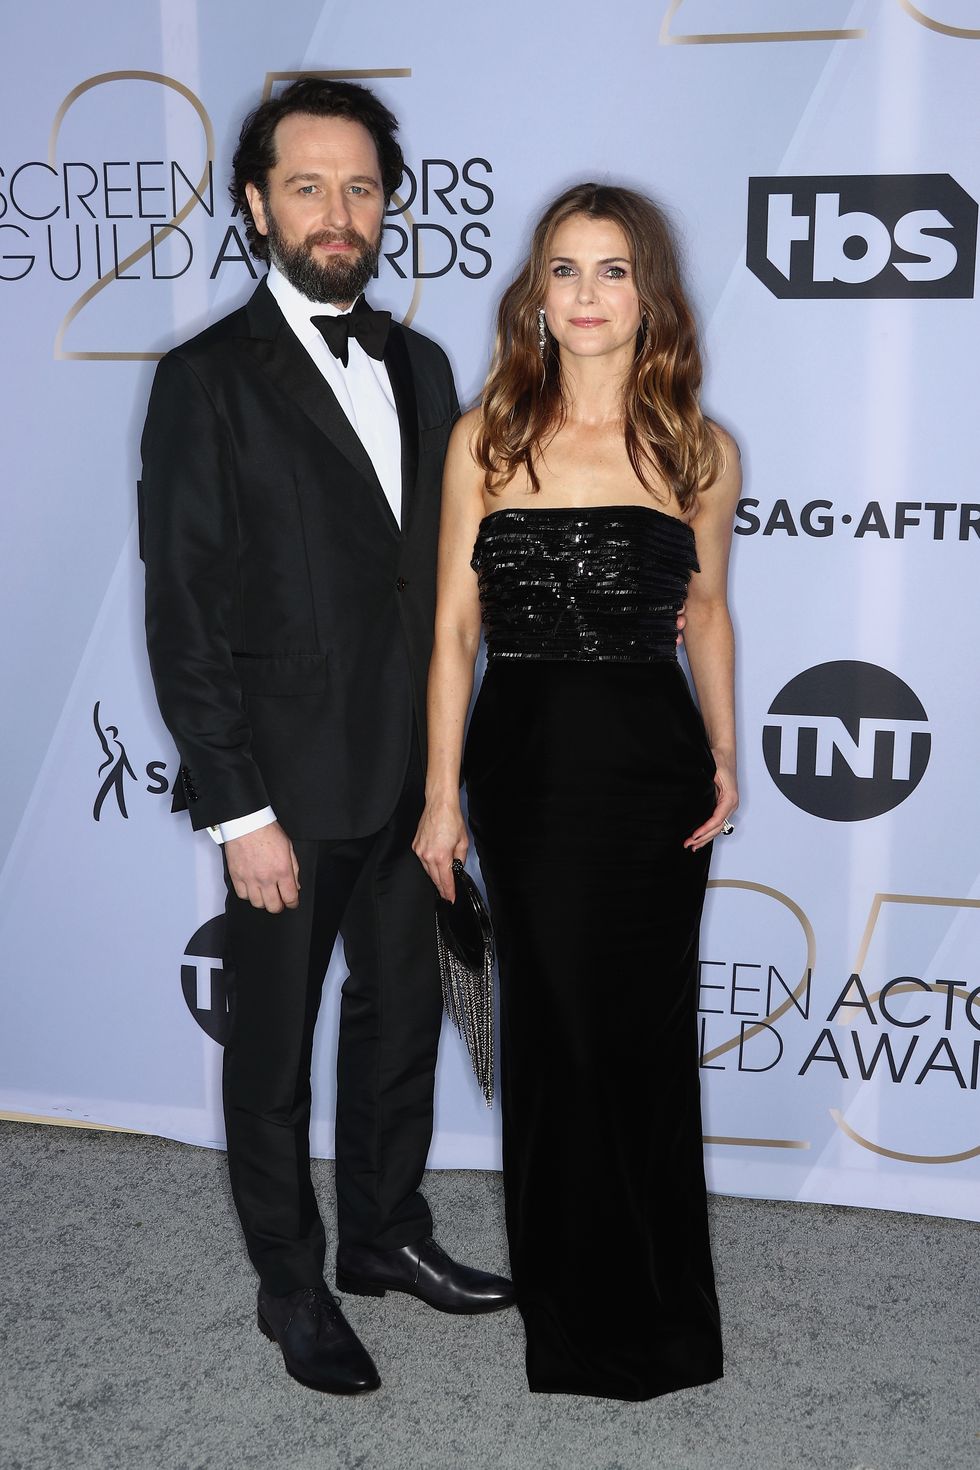 https://hips.hearstapps.com/hmg-prod.s3.amazonaws.com/images/matthew-rhys-and-keri-russell-attend-the-25th-annual-screen-news-photo-1090478838-1548637808.jpg?crop=1xw:1xh;center,top&amp;resize=980:*